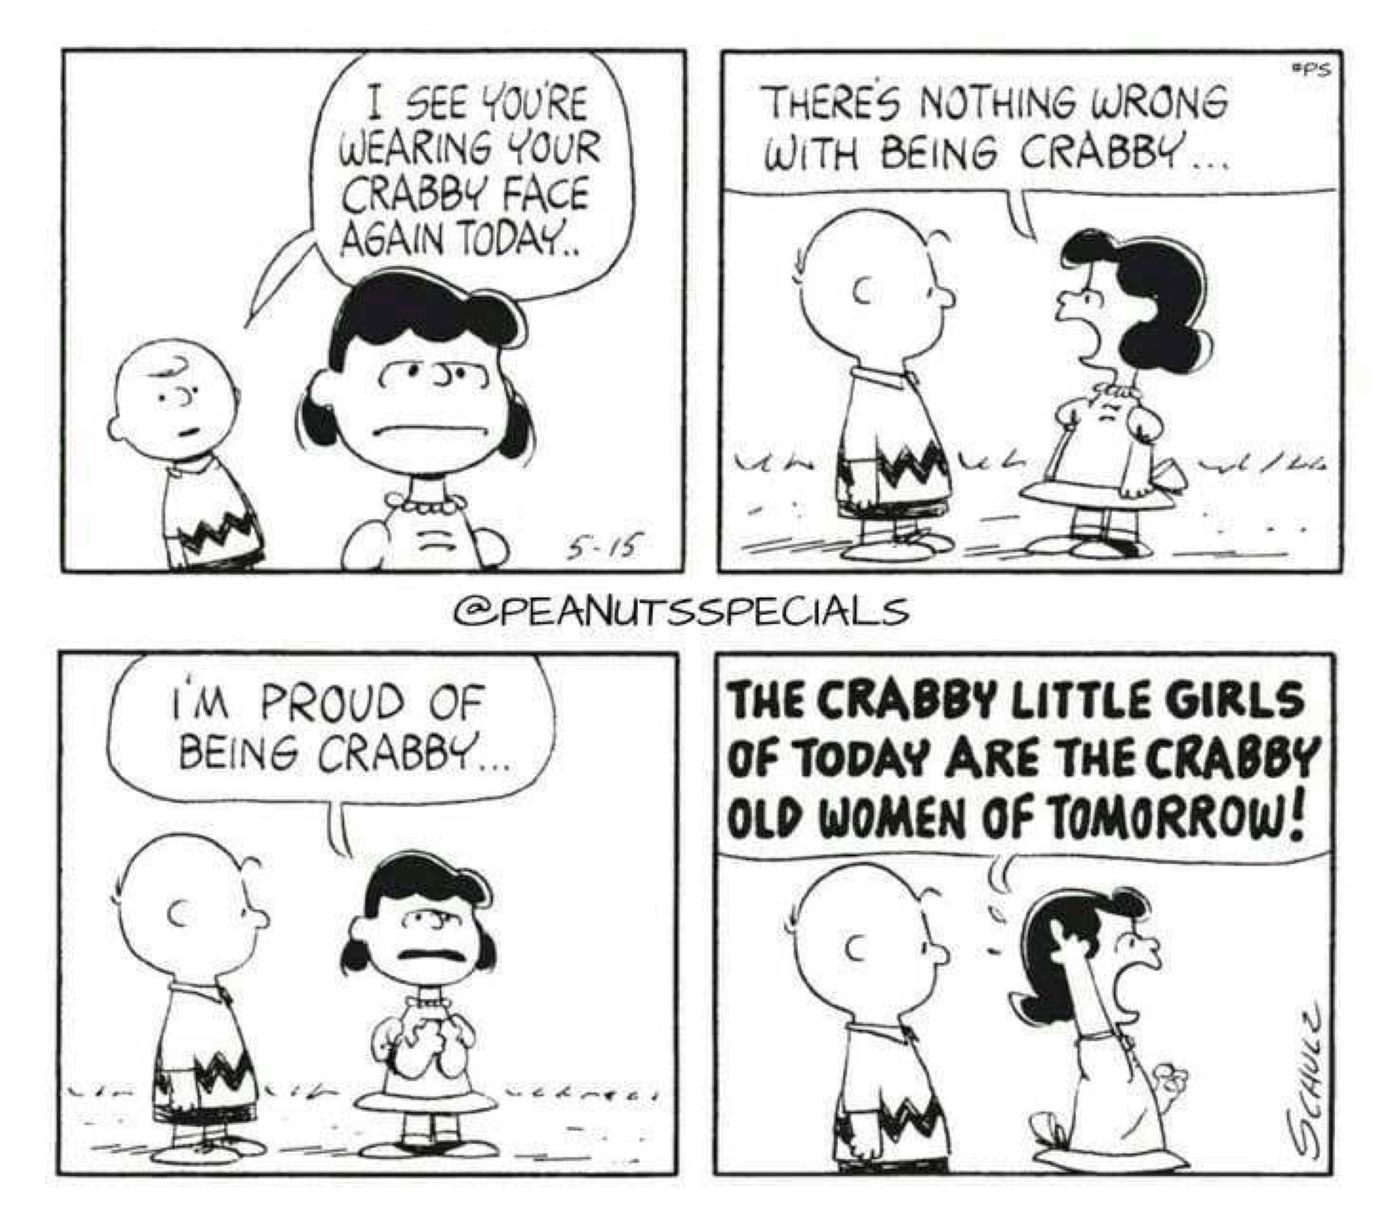 Charlie Brown tells Lucy she is wearing her Crabby Face